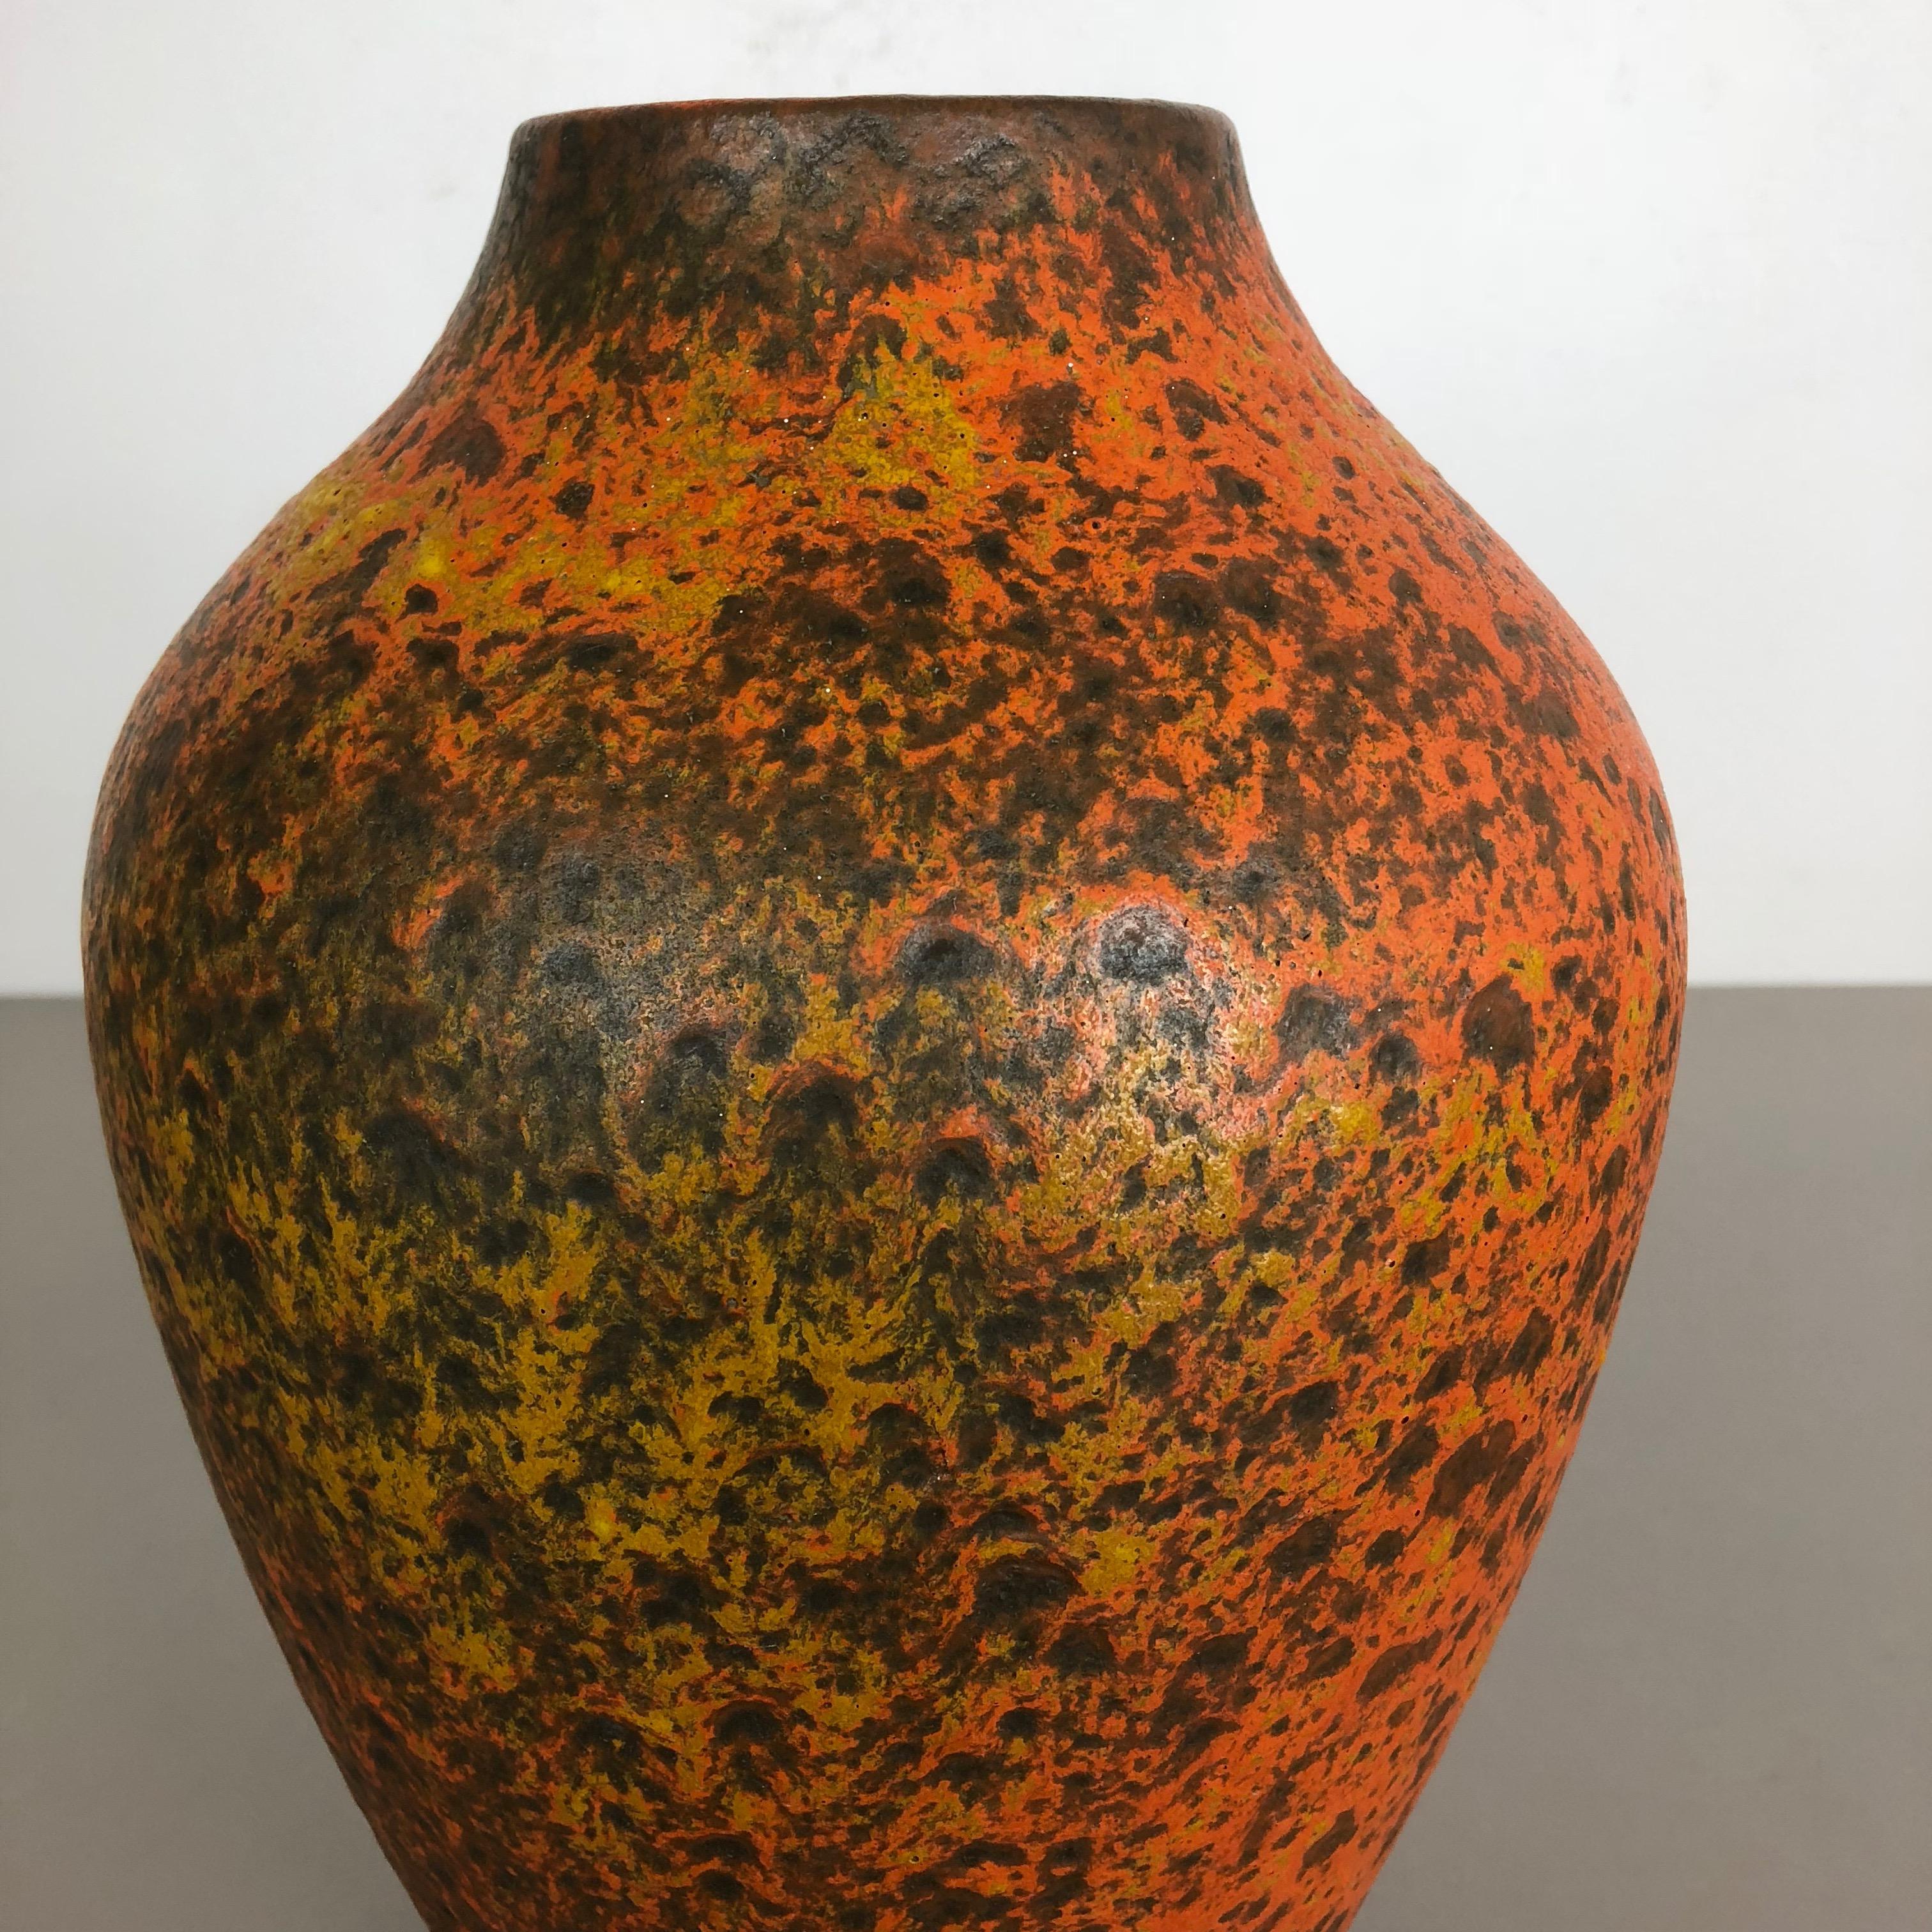 Abstract Colorful Pottery Floor Vase Made by Silberdistel, W. Germany, 1950s For Sale 5